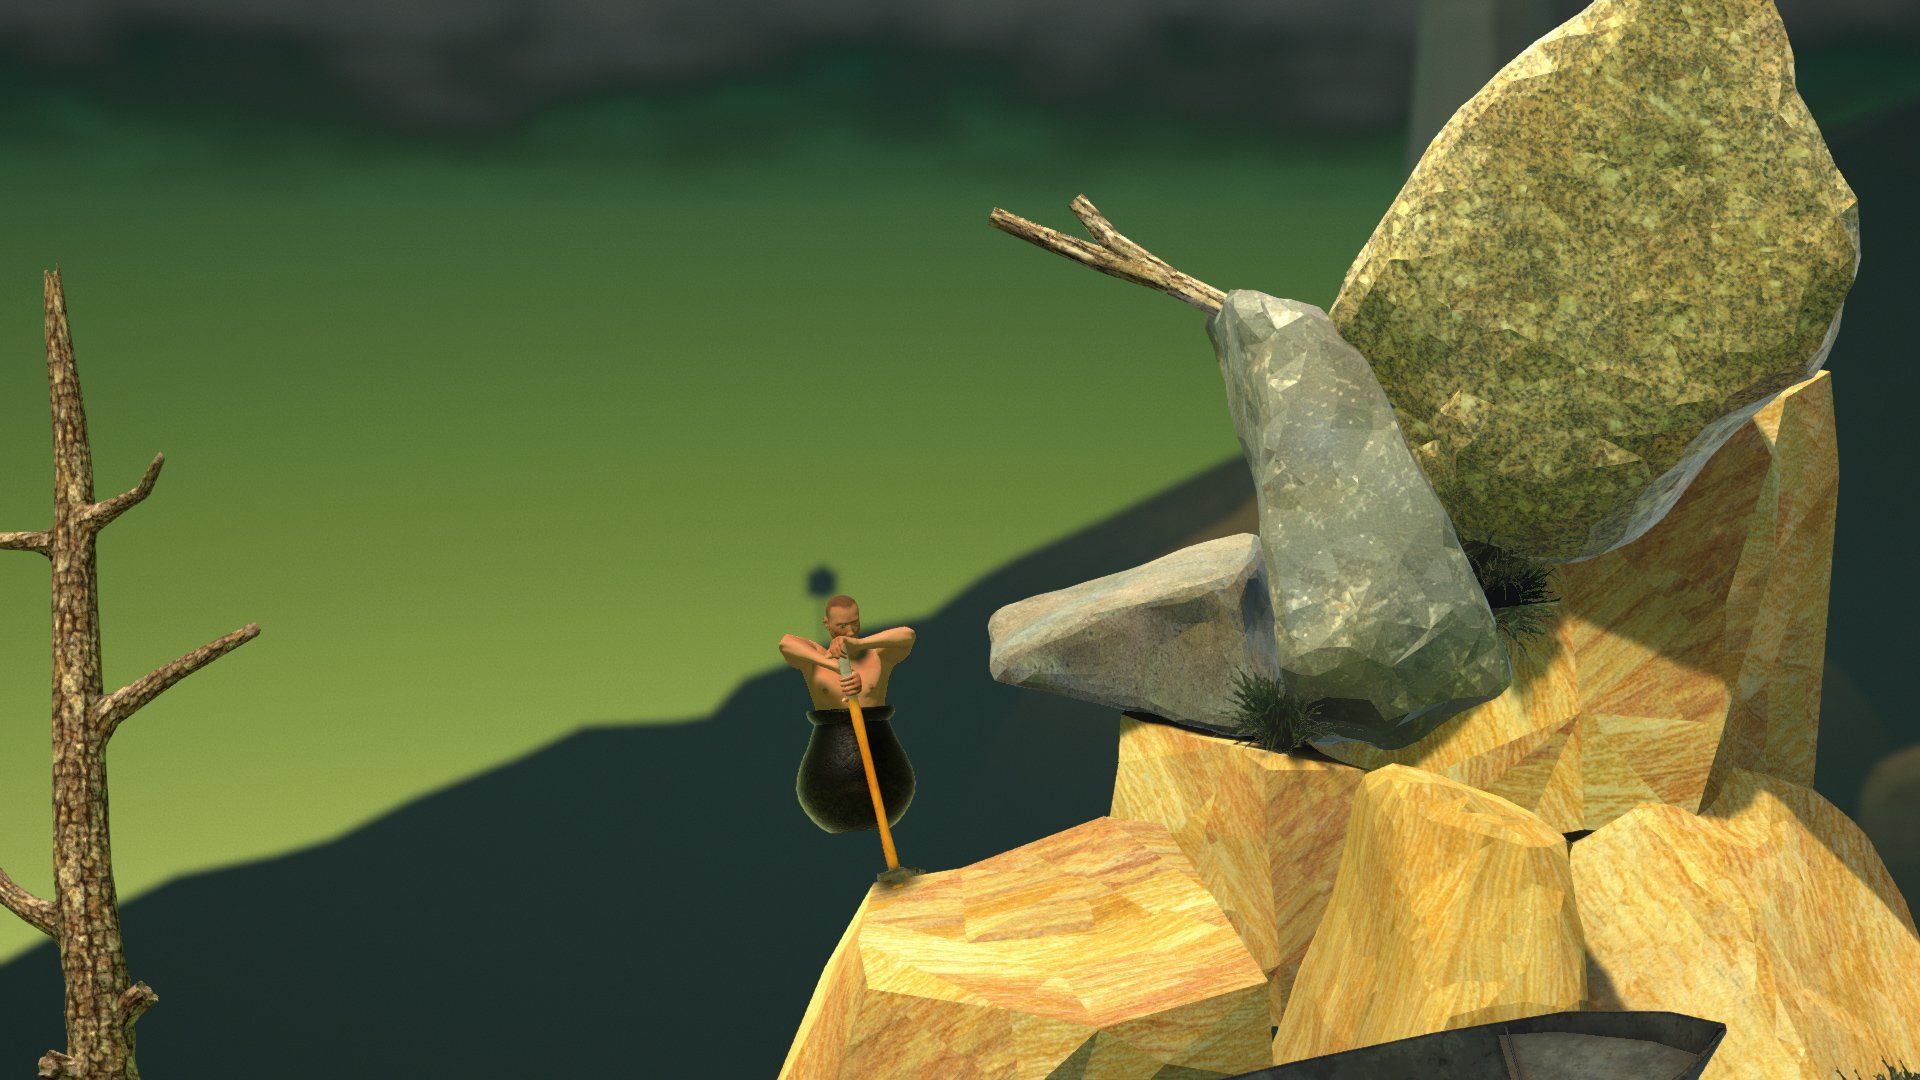 Getting Over It with Bennett Foddy HD Wallpaper and Background Image